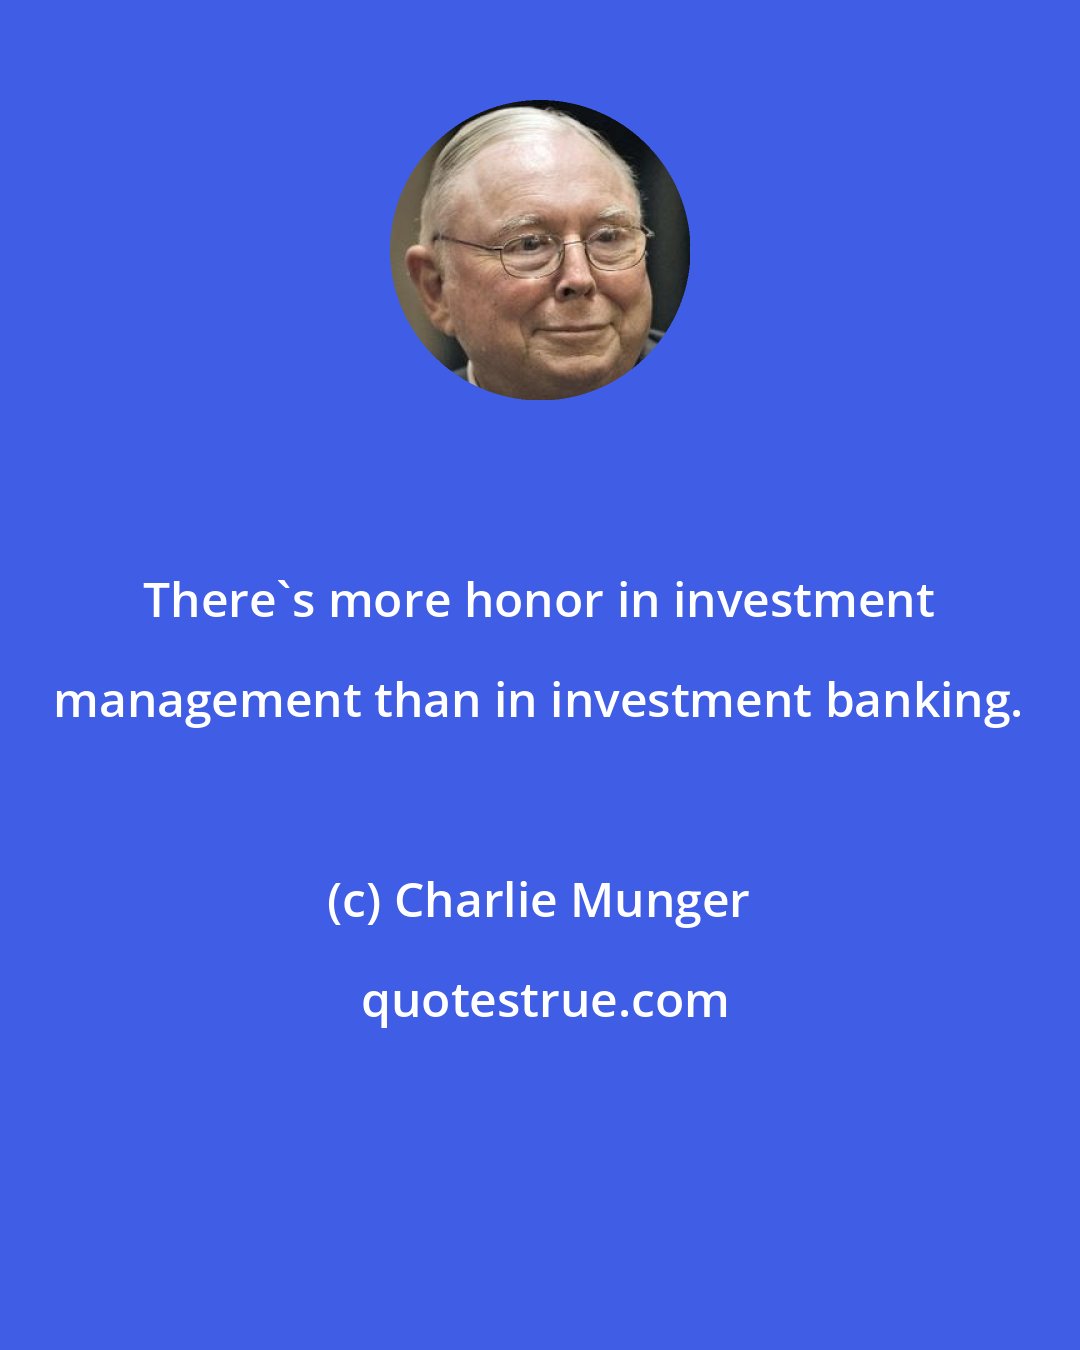 Charlie Munger: There's more honor in investment management than in investment banking.